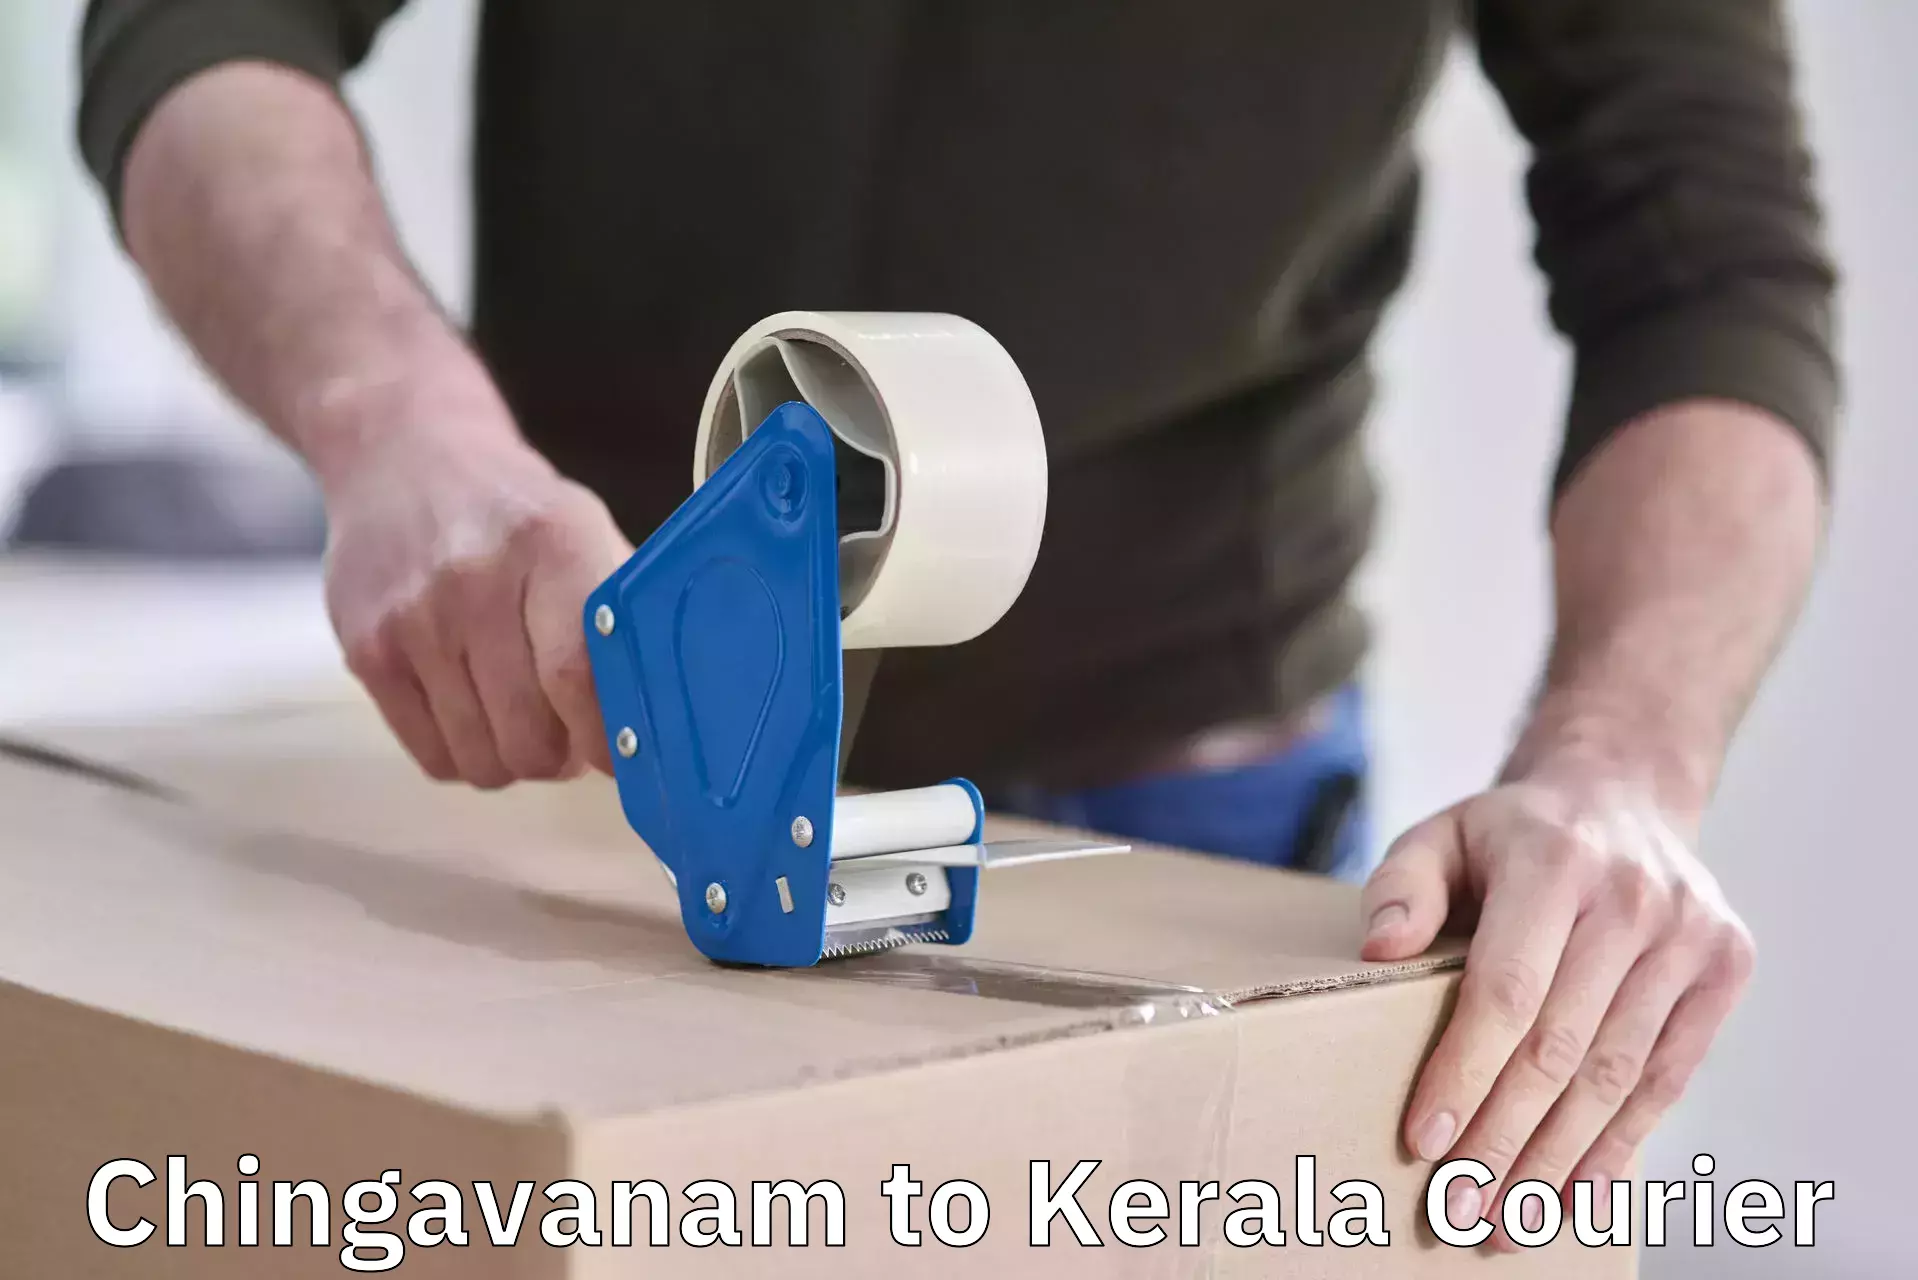 Luggage delivery system Chingavanam to Cochin University of Science and Technology